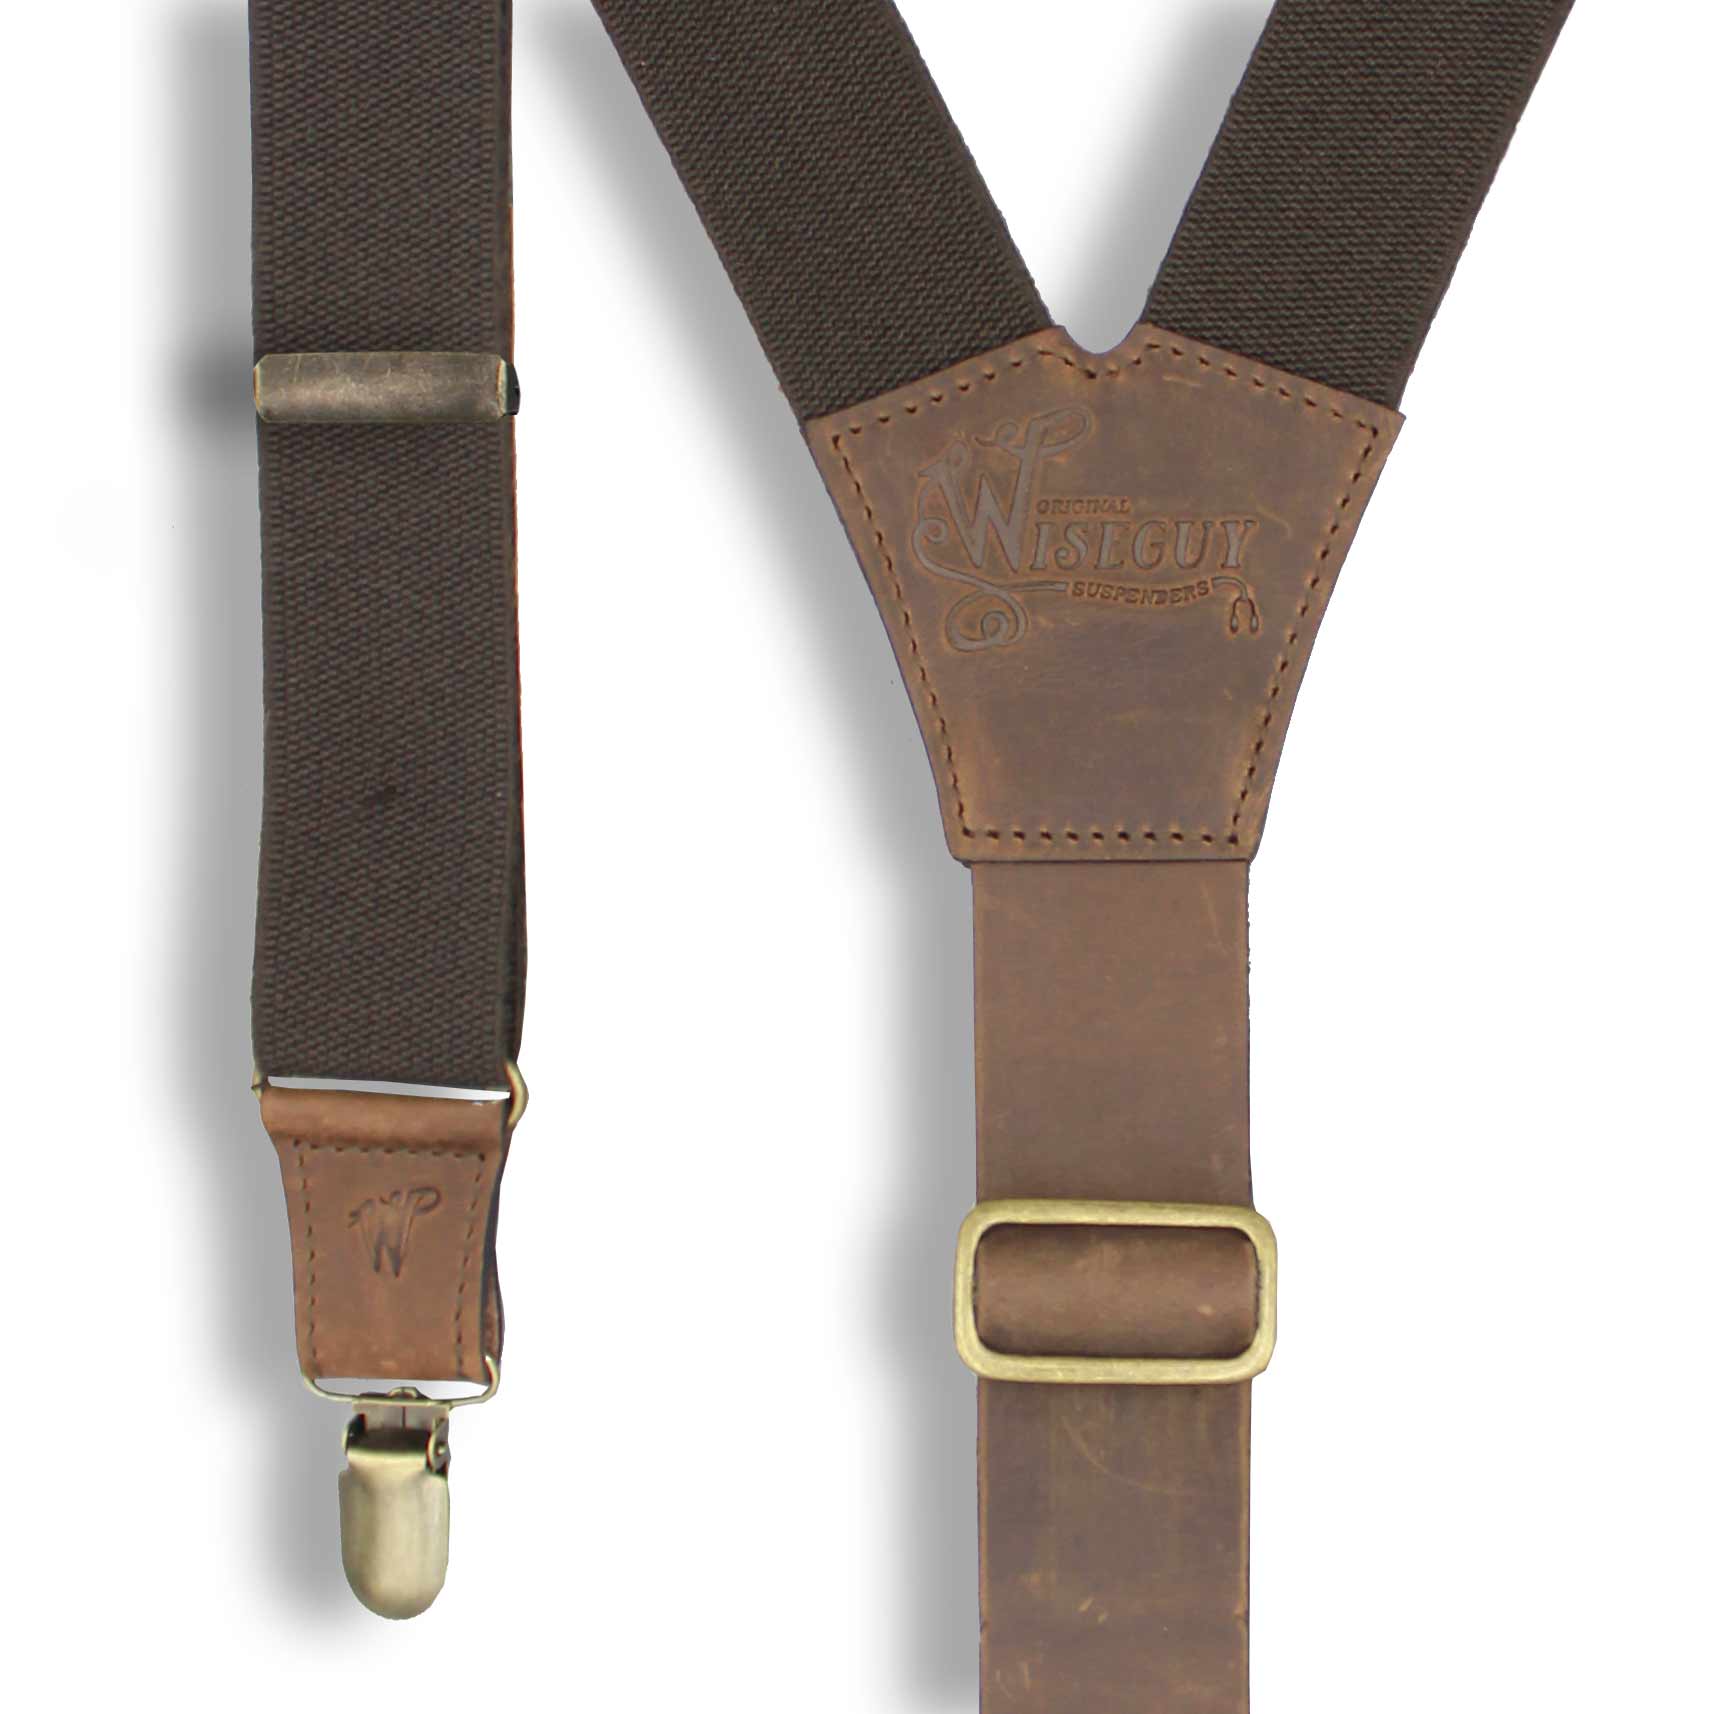 Sand white Wiseguy Flex 0.75 inch wide Camel Brown Leather Suspenders with adjustable Brown or sand white elastic Back Strap